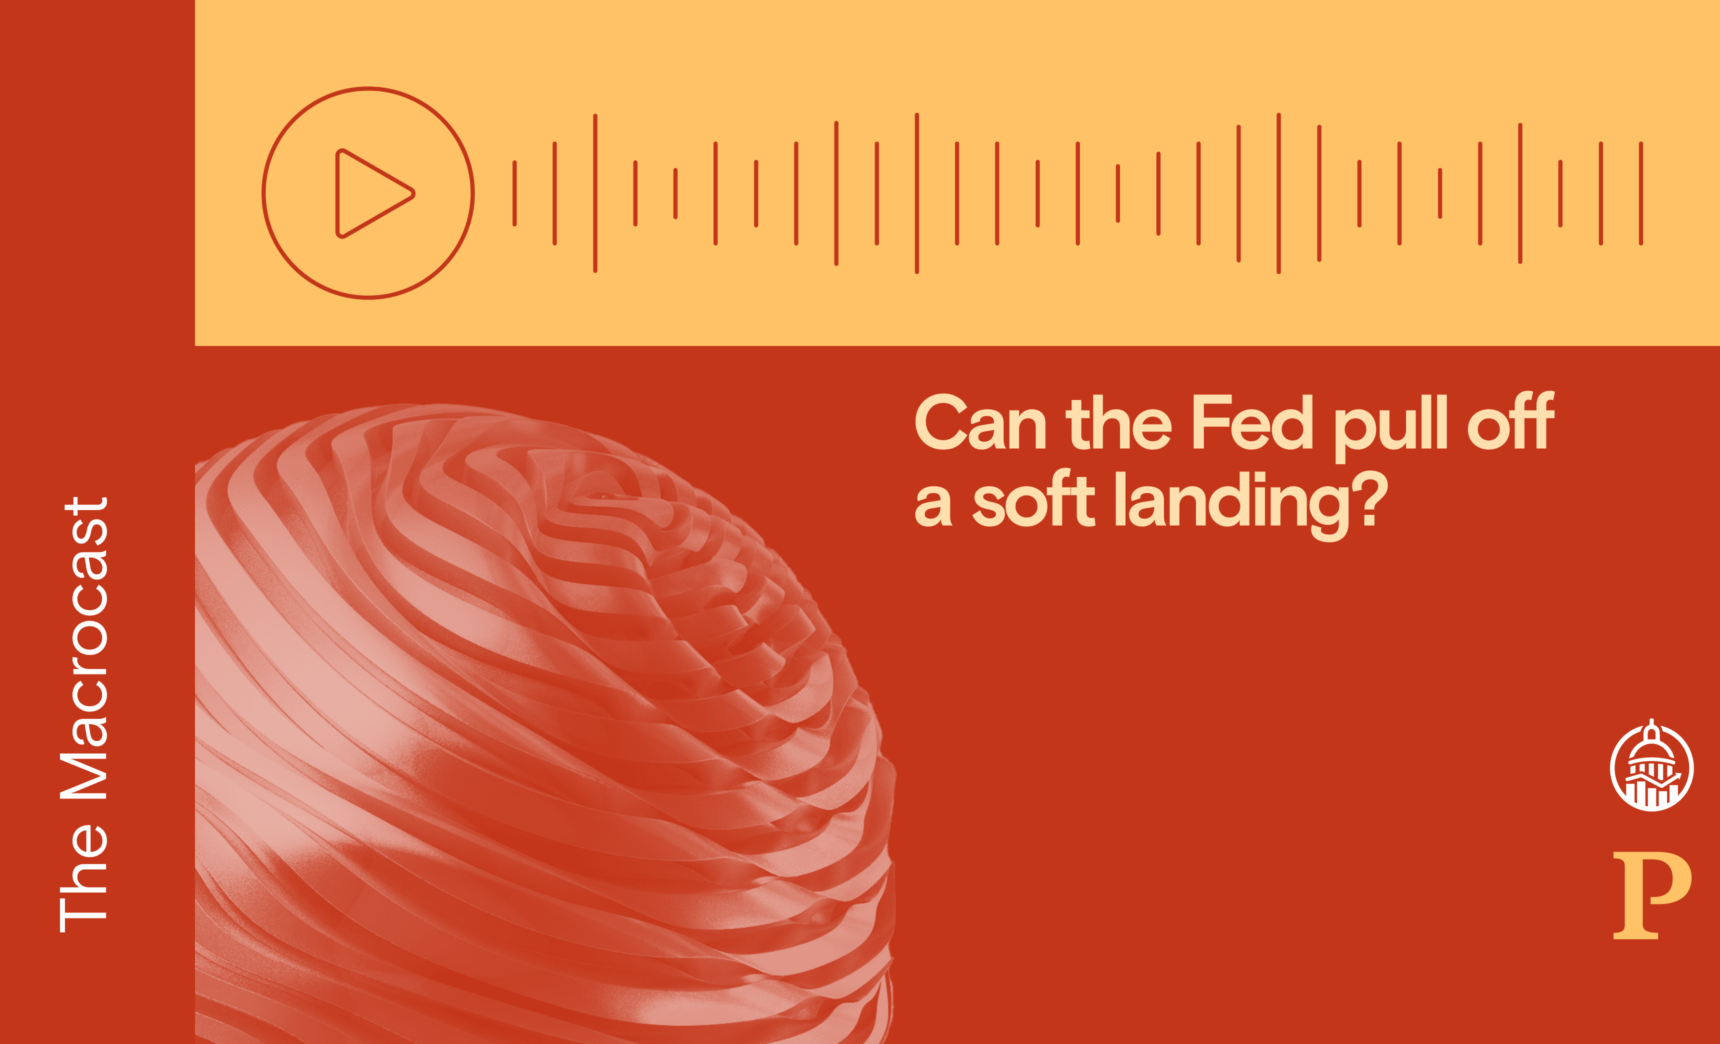 Macrocast: Can the Fed pull off a soft landing?